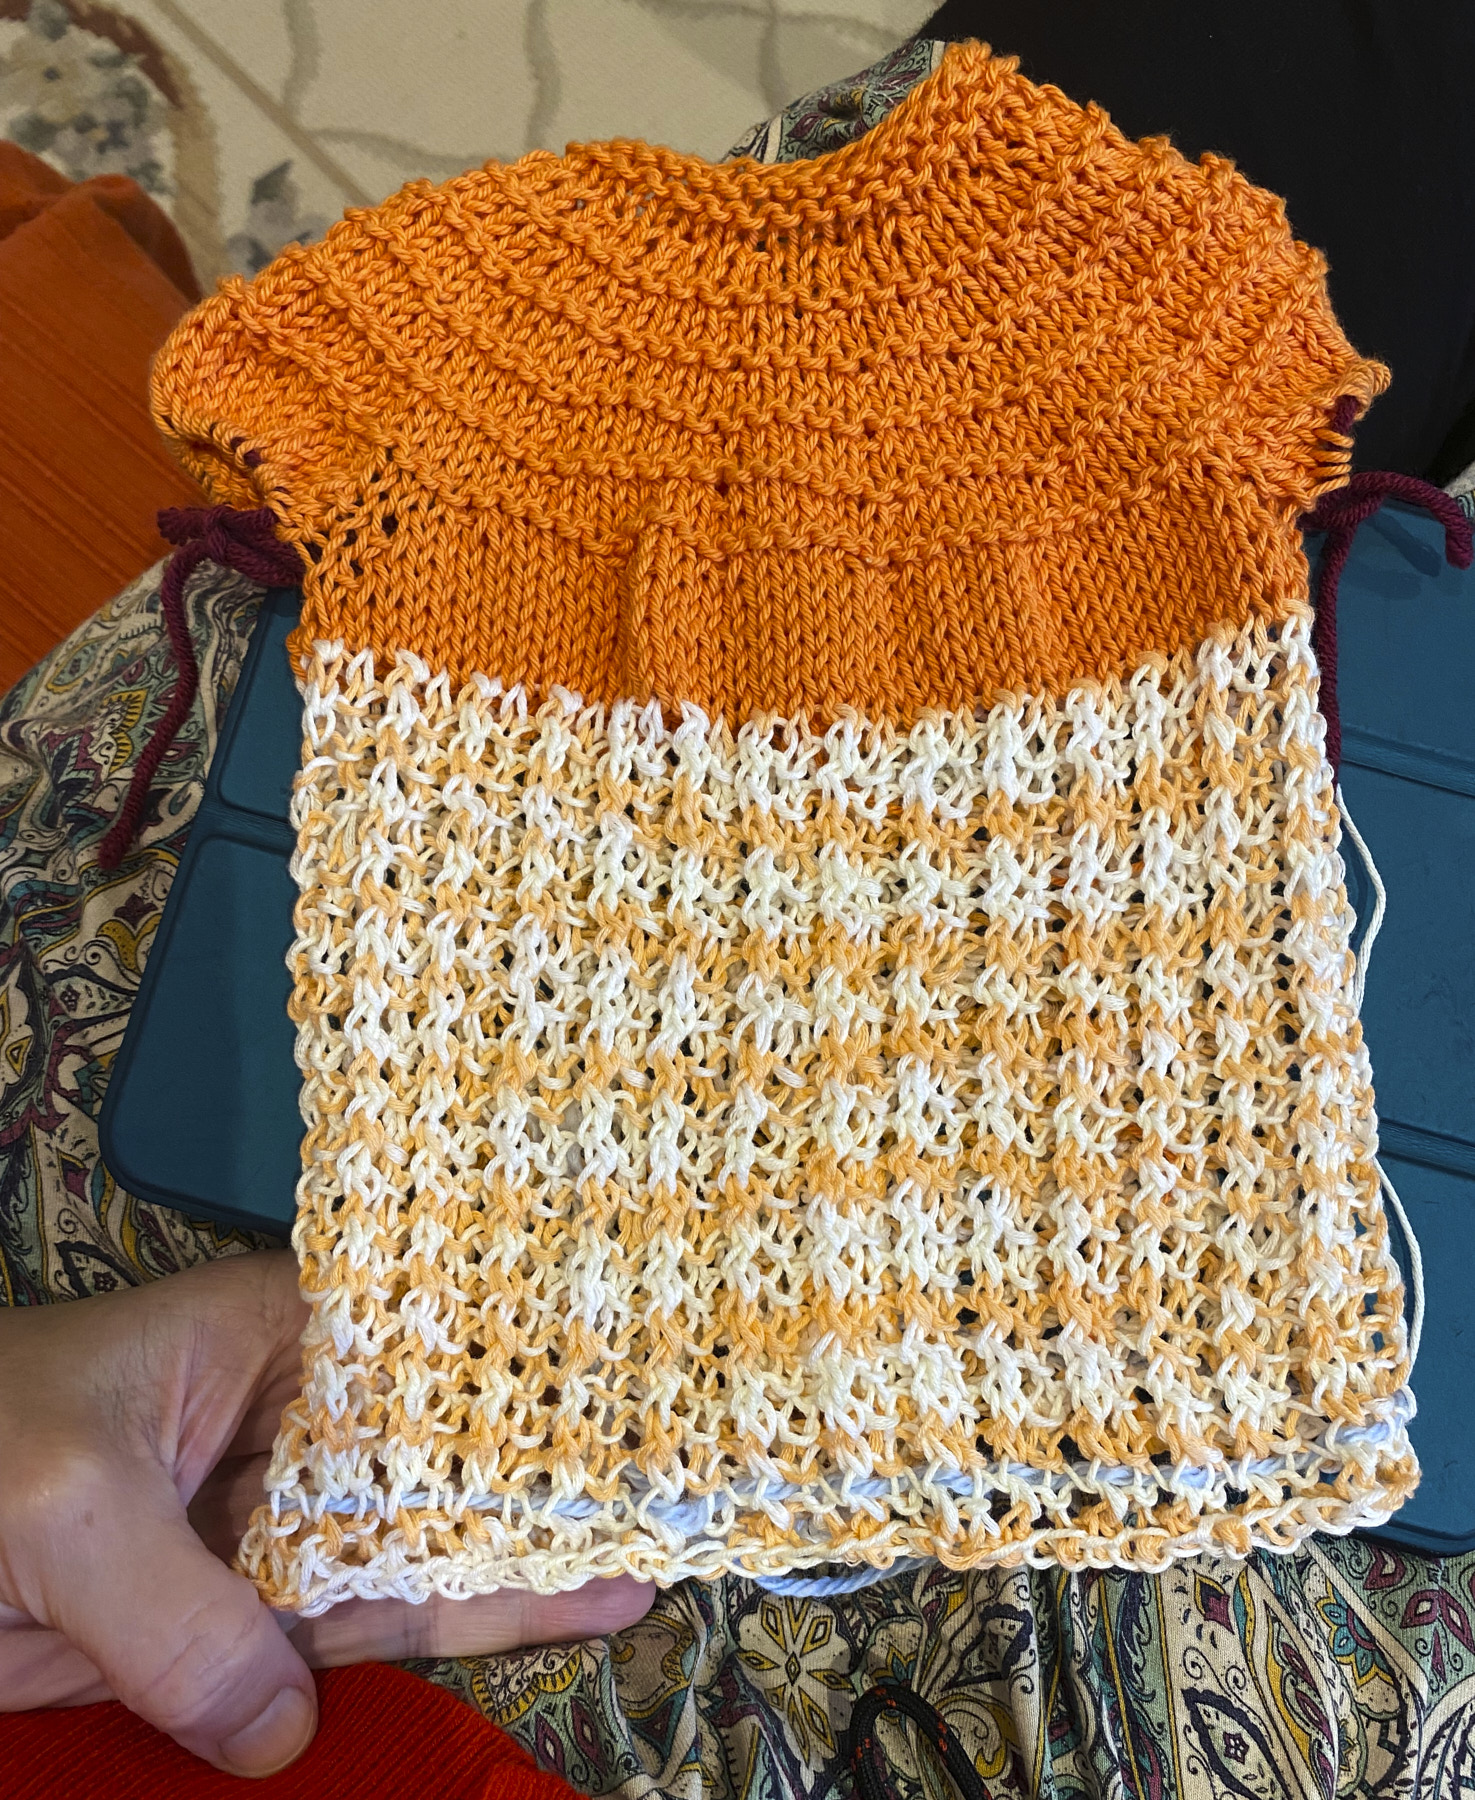 Lacy baby sweater done in orange